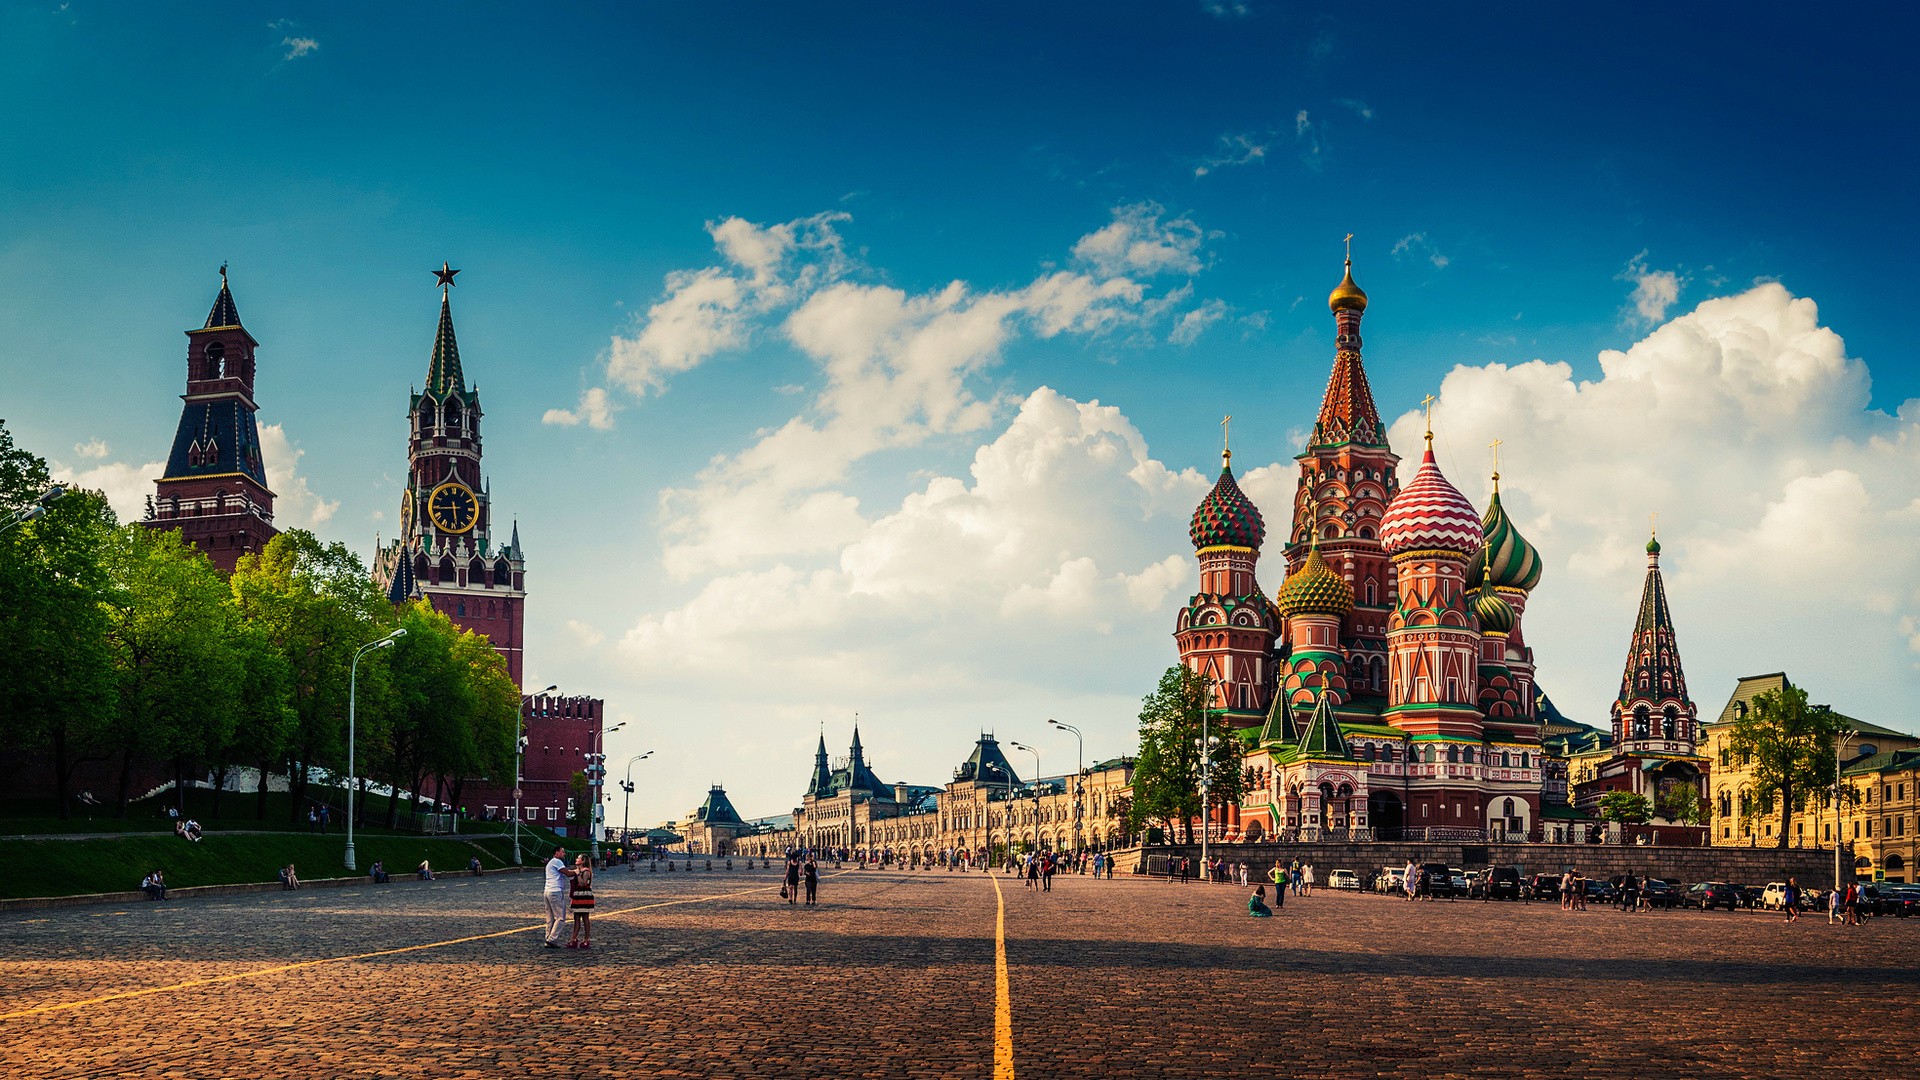 #street, #cathedral, #clock Tower, #people, #town Square - Москва Фон , HD Wallpaper & Backgrounds